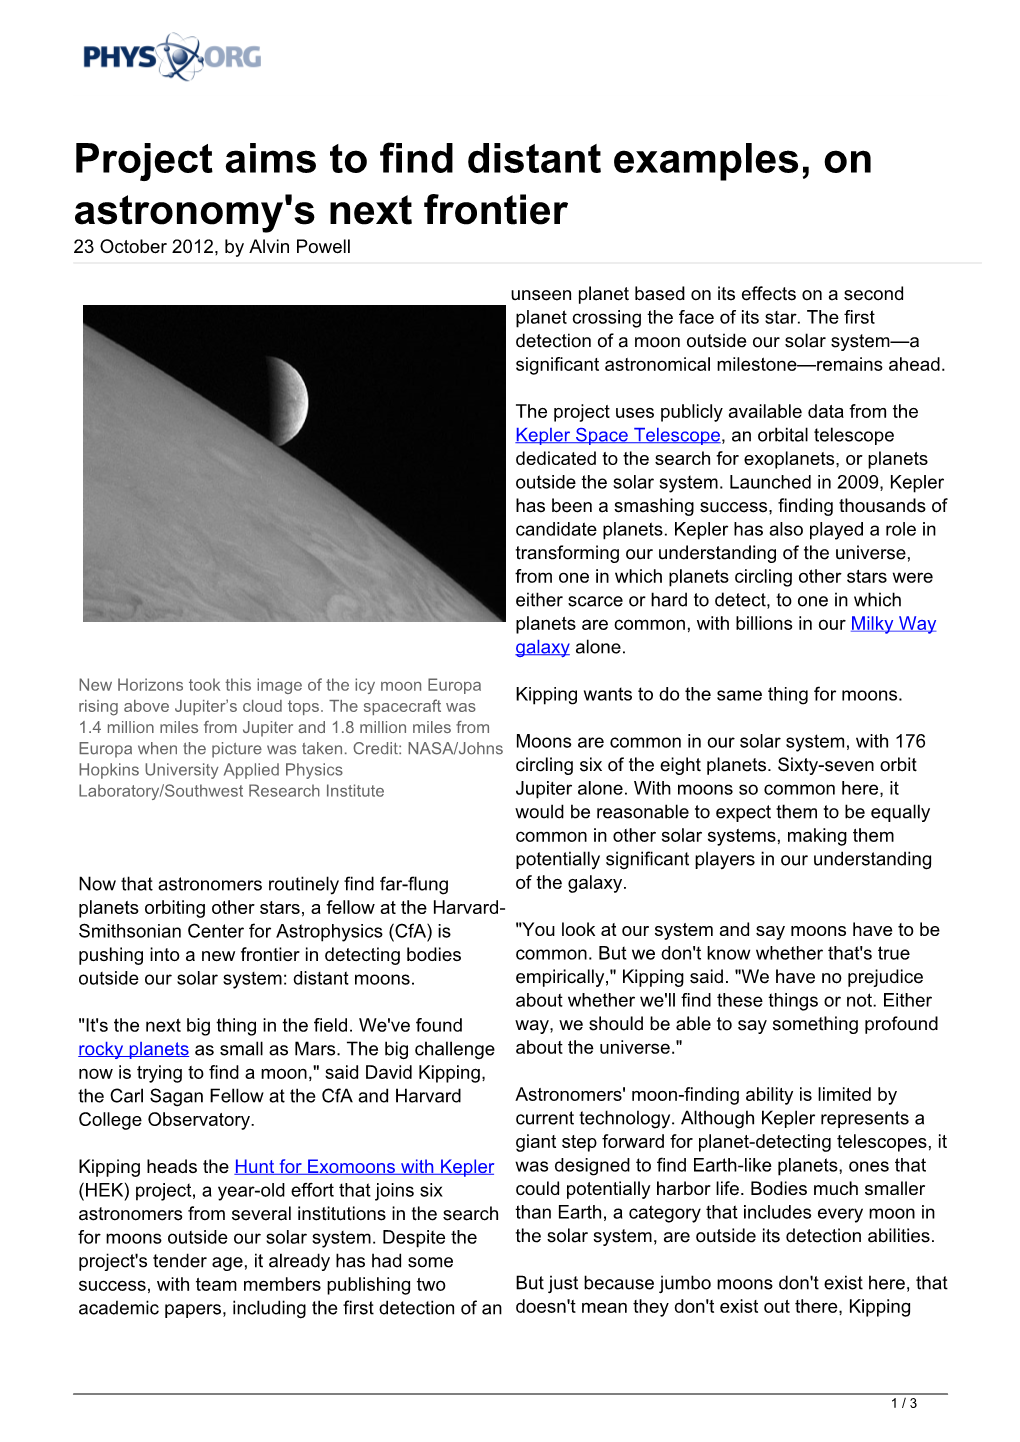 Project Aims to Find Distant Examples, on Astronomy's Next Frontier 23 October 2012, by Alvin Powell